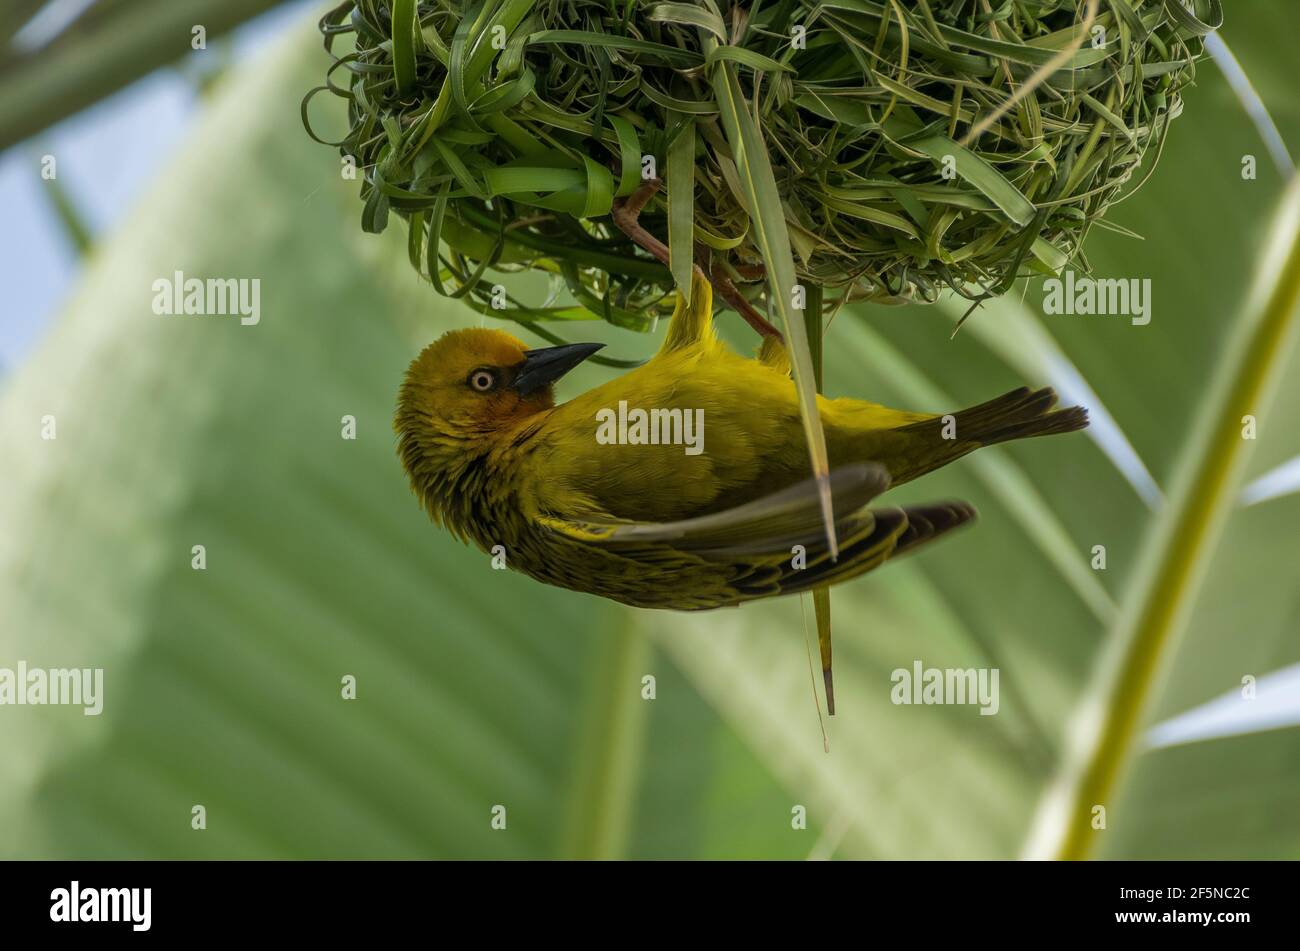 A cape weaver bird (Ploceus capensis) hanging from its spherical nest in the town of George, Western Cape, South Africa in August (Winter). Stock Photo